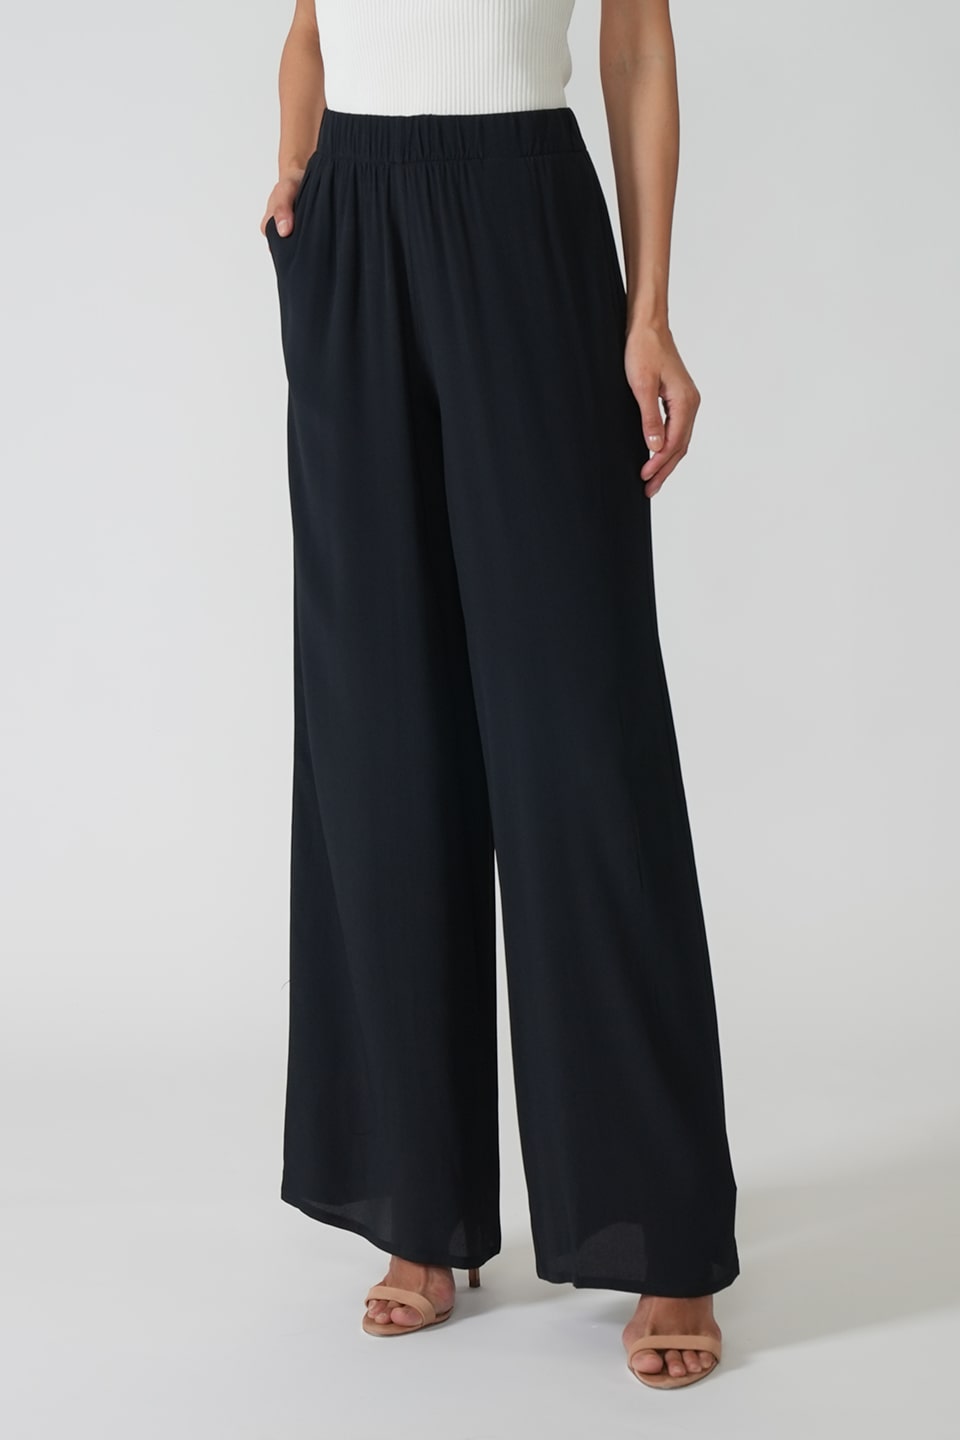 Shop online trendy Black Women pants from Federica Tosi Fashion designer. Product gallery 1